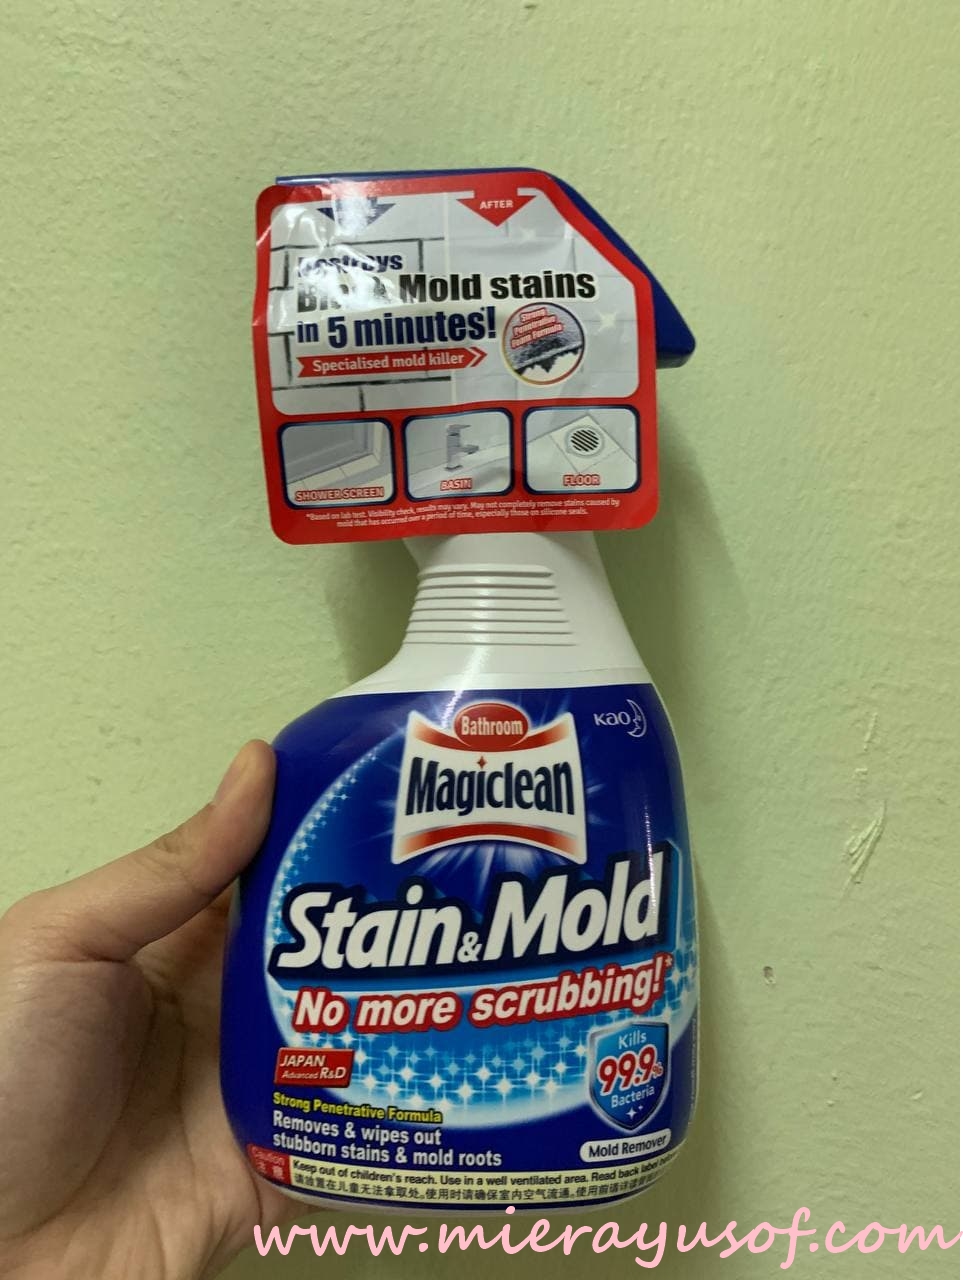 Mold and magiclean stain Kao Magiclean